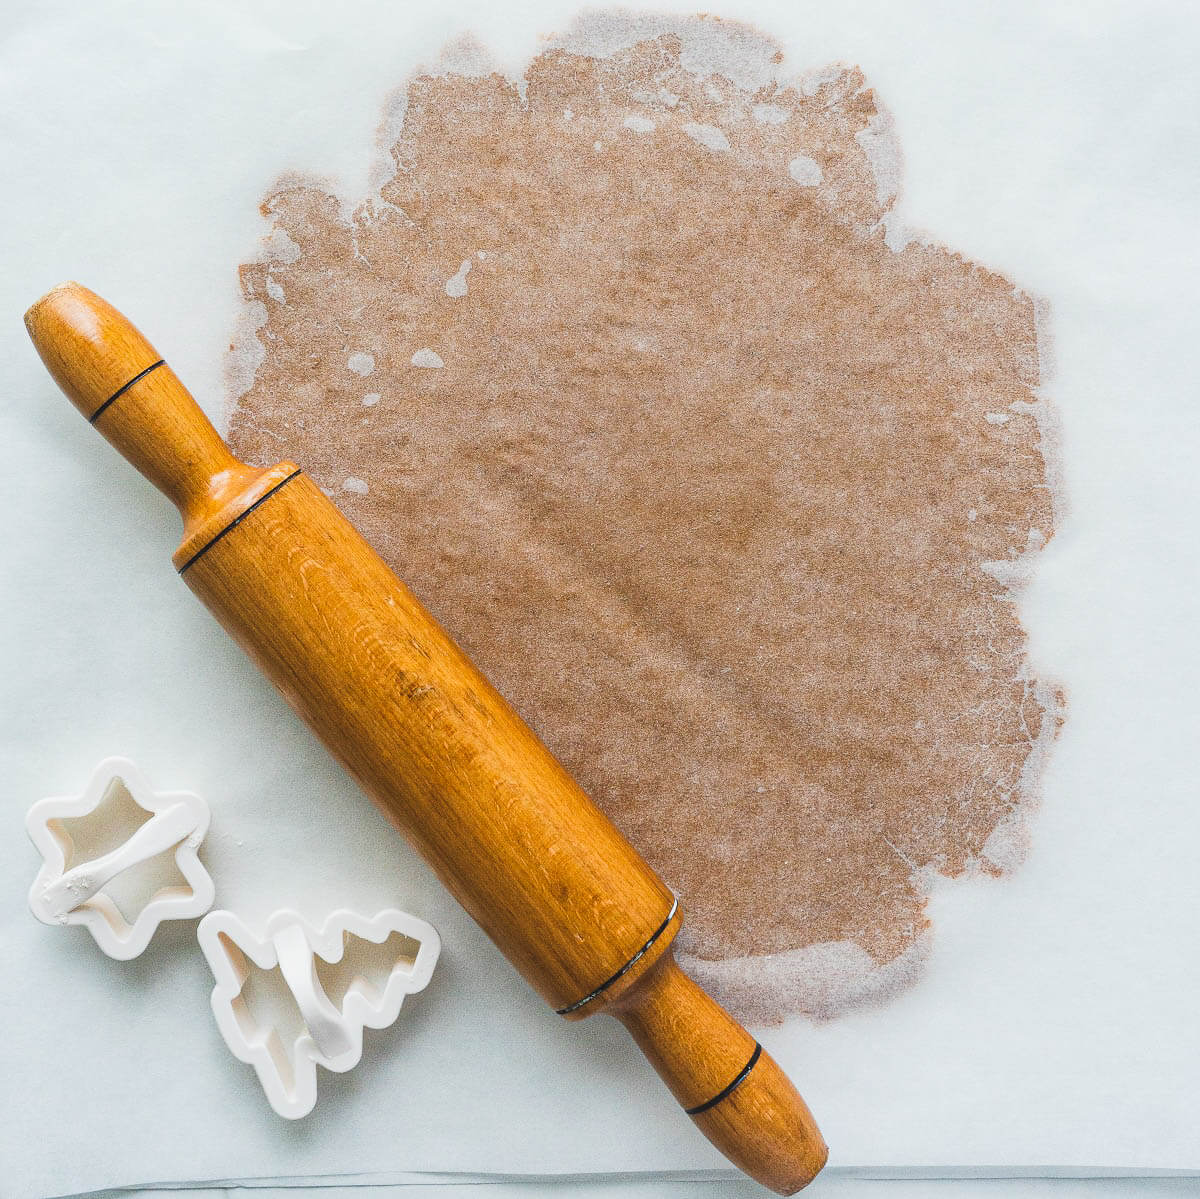 A wooden rolling pin beside rolled gingerbread cookie dough in between two pieces of parchment paper.